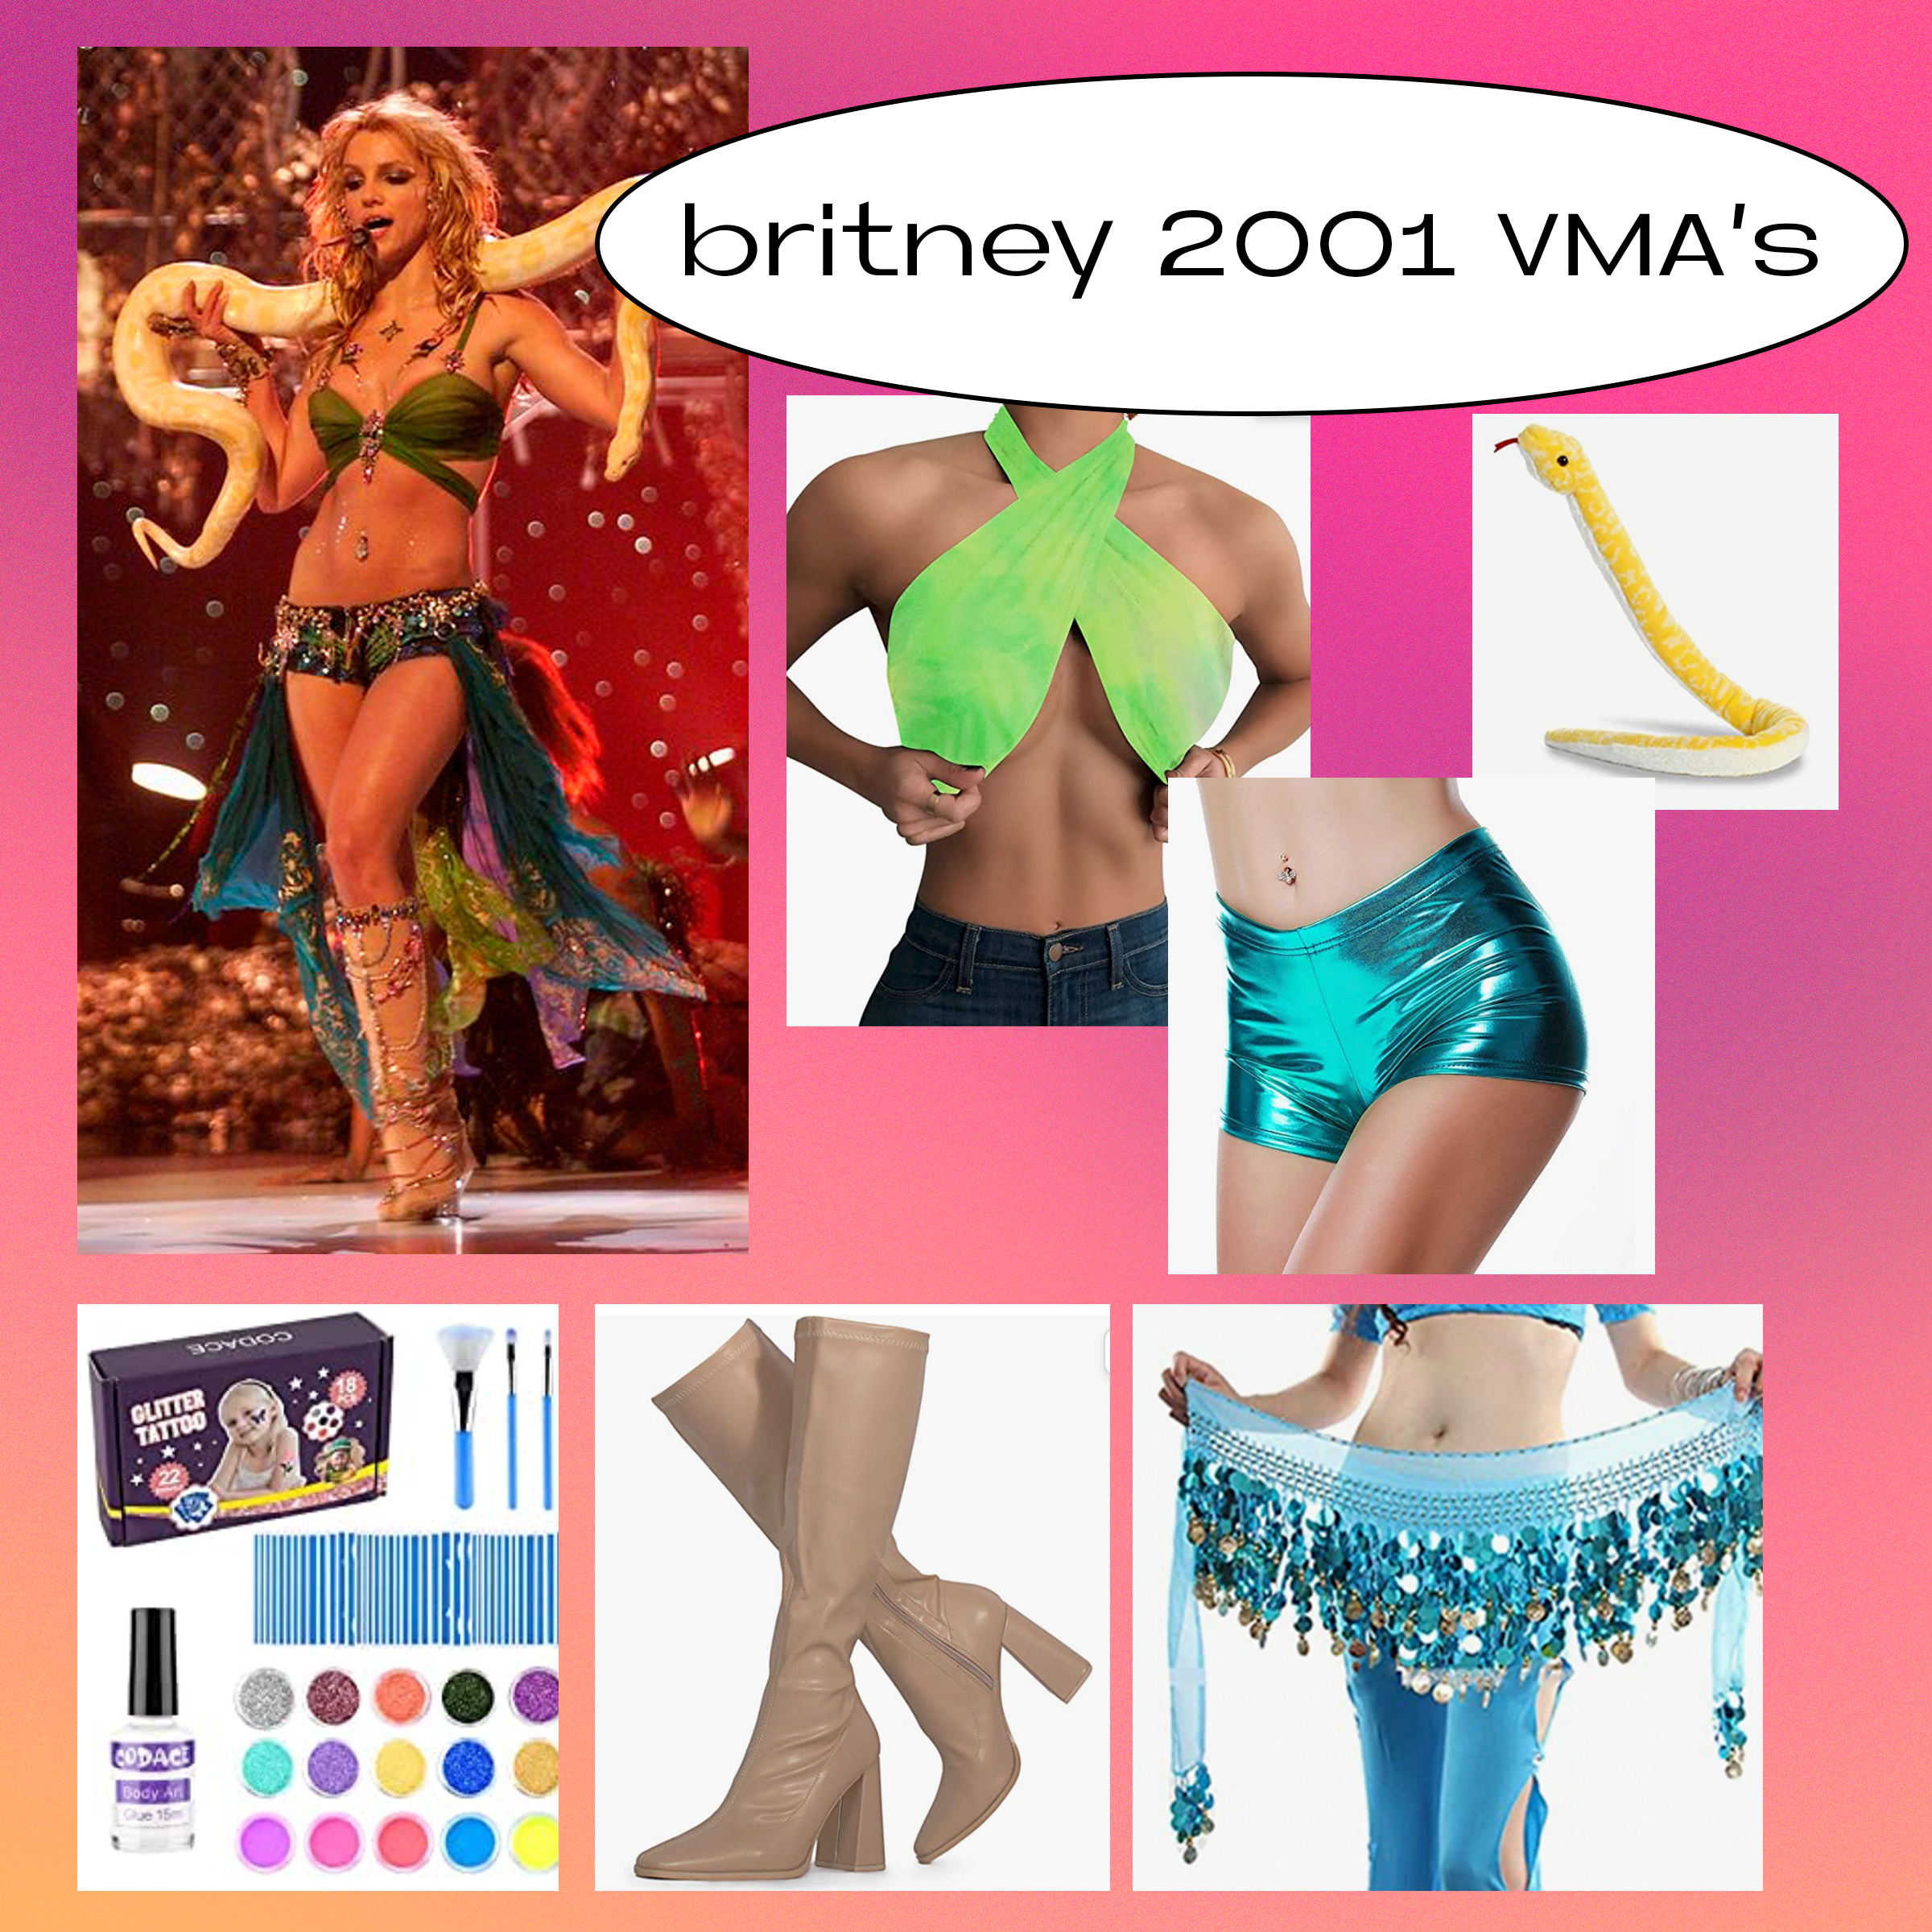 Britney Spears - "I'm A Slave 4 U" at the VMA's (2001)